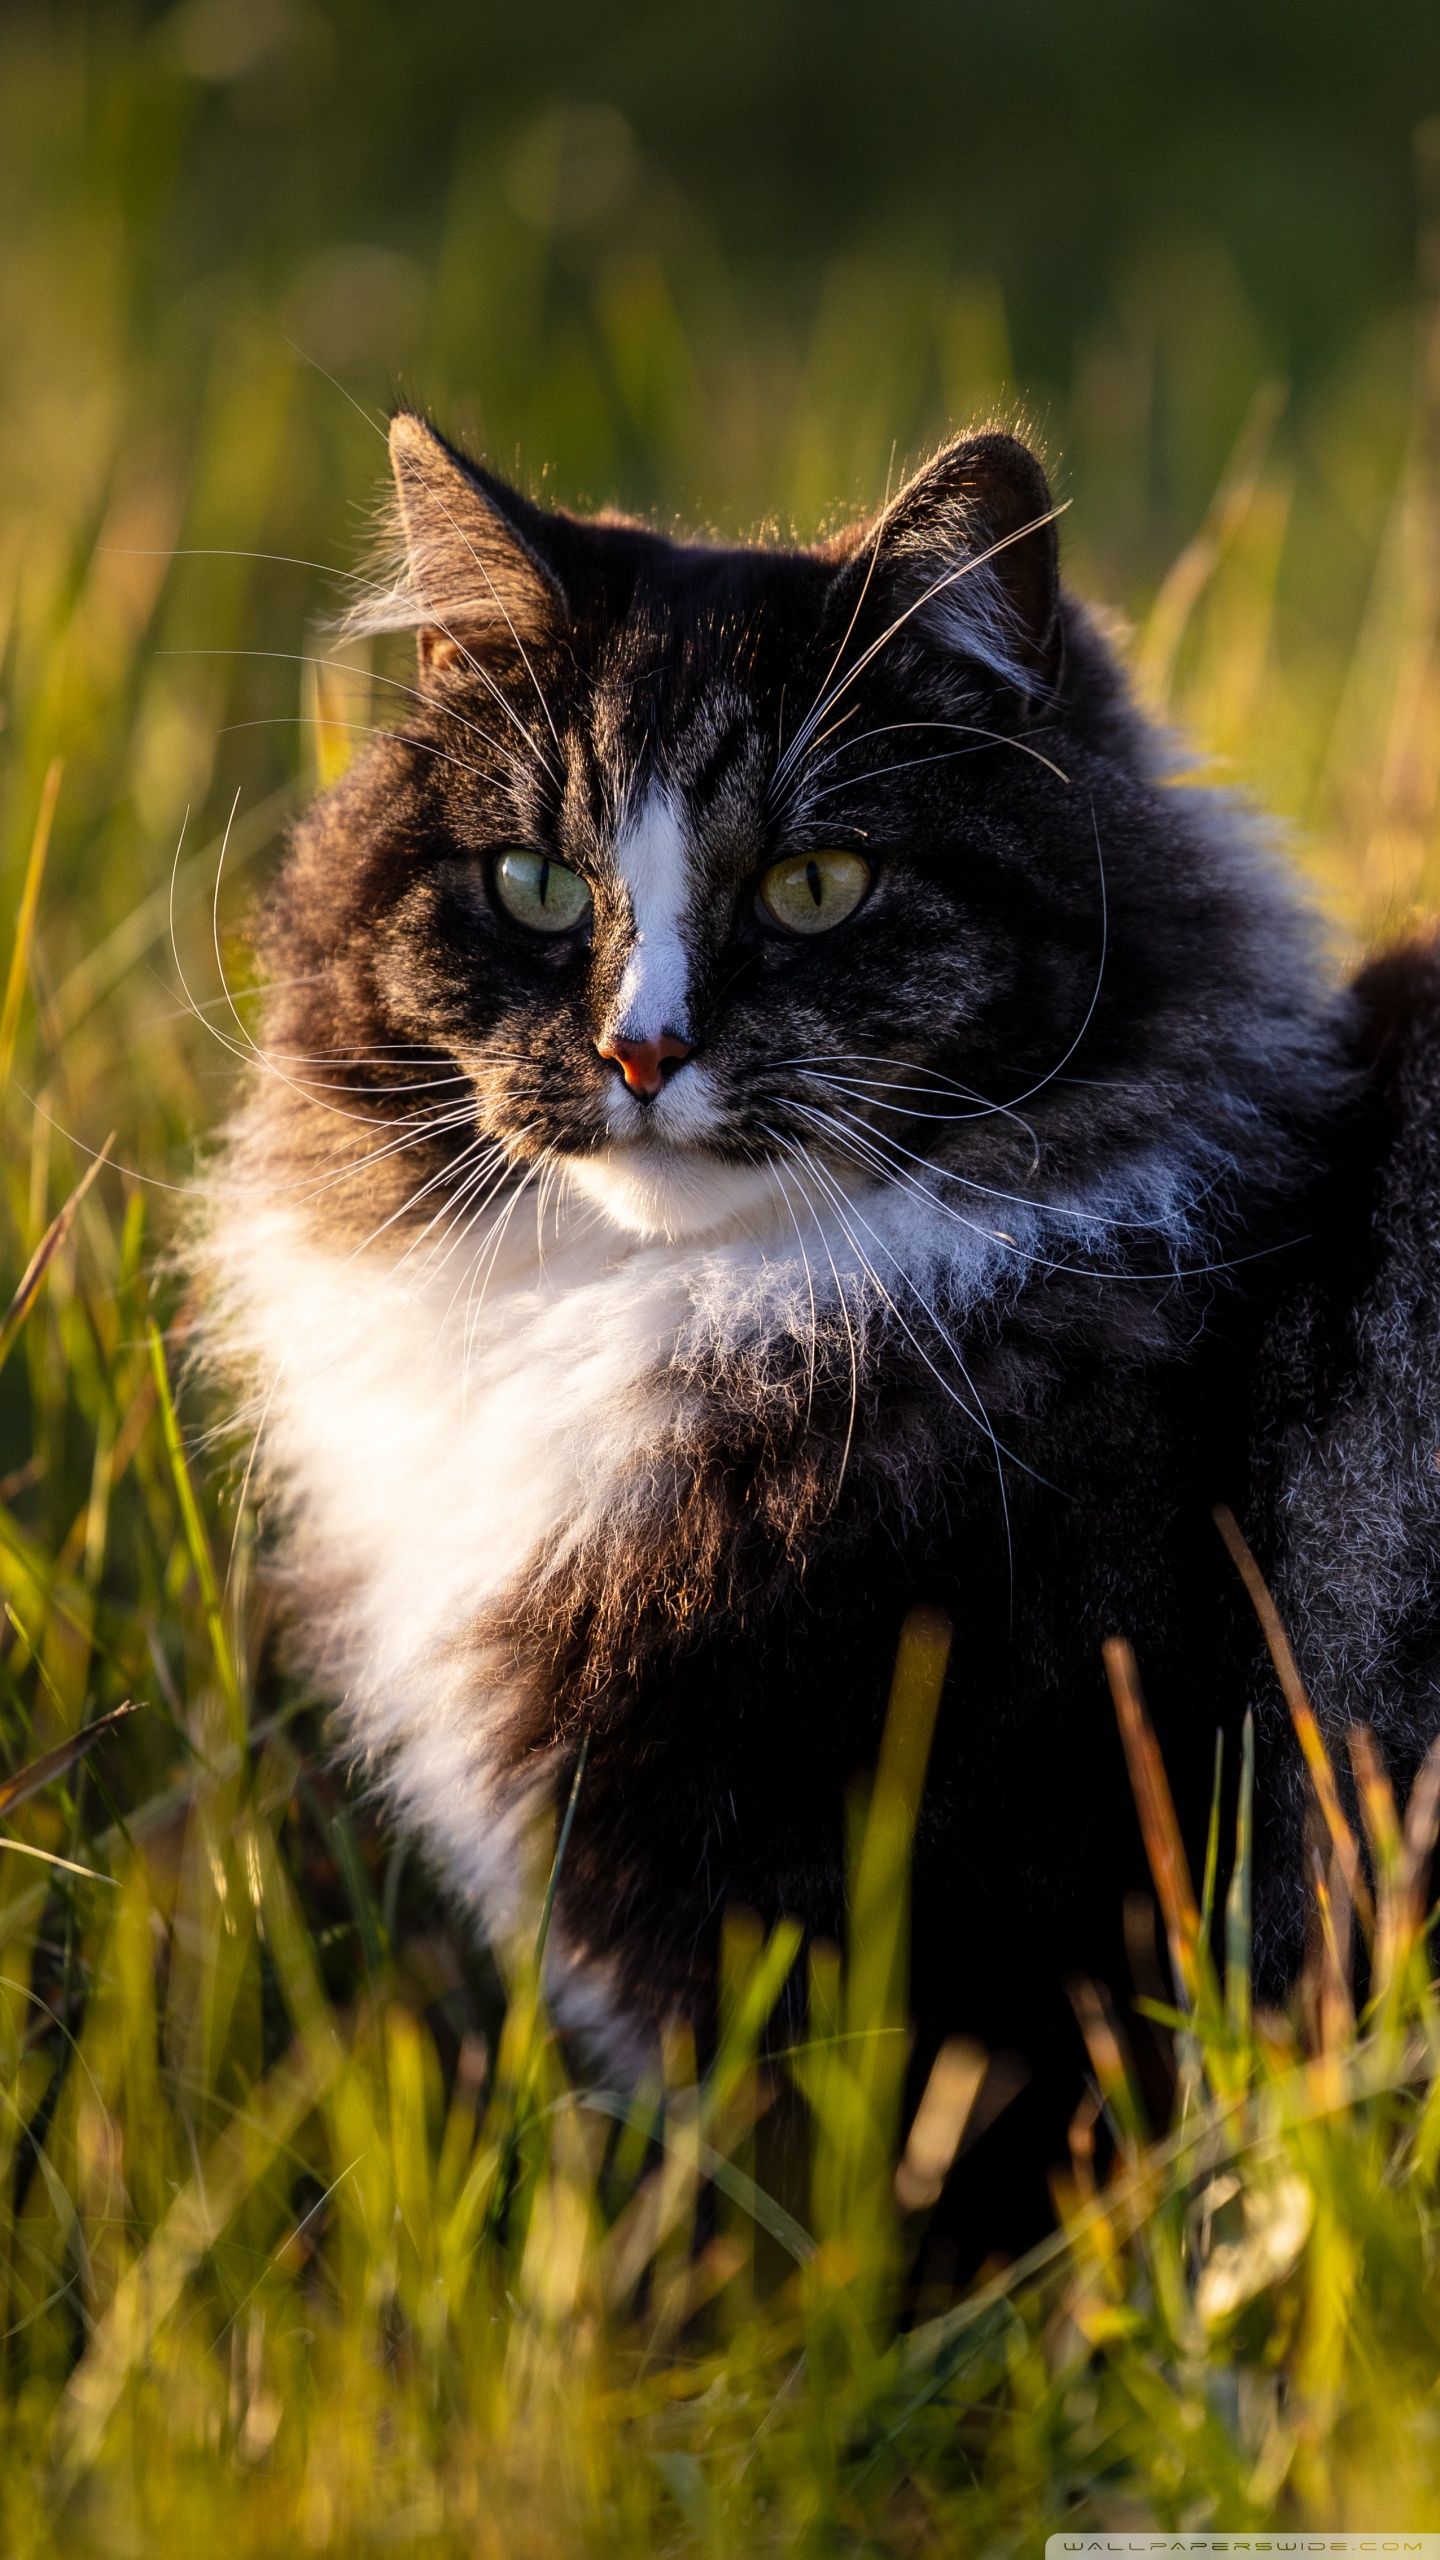 A black and white cat sitting in the grass. - Cat